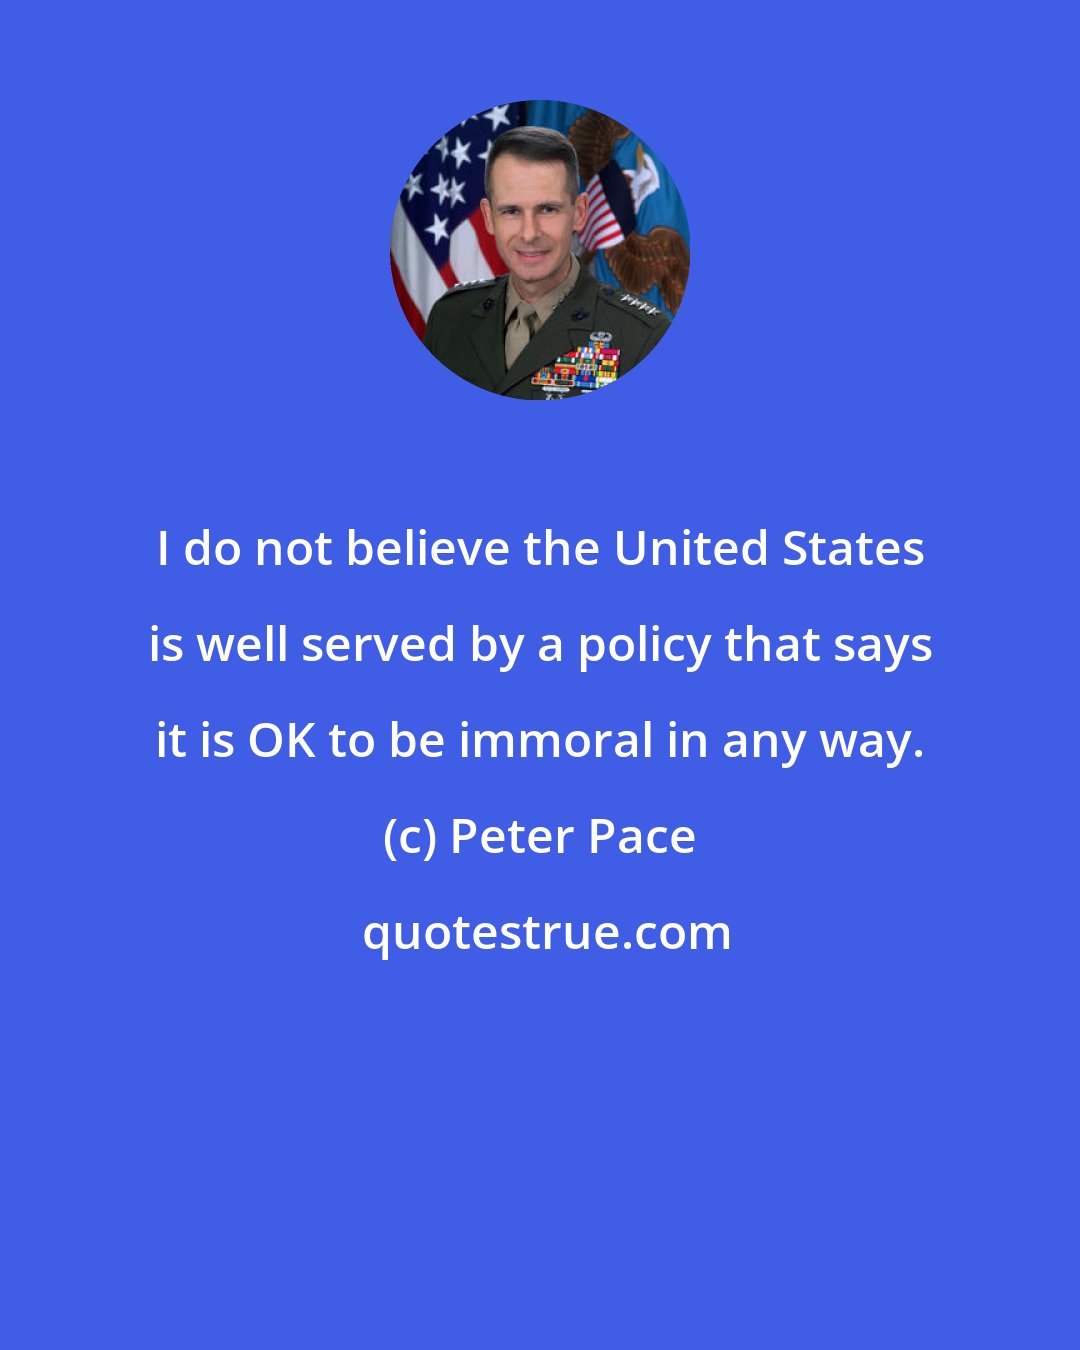 Peter Pace: I do not believe the United States is well served by a policy that says it is OK to be immoral in any way.